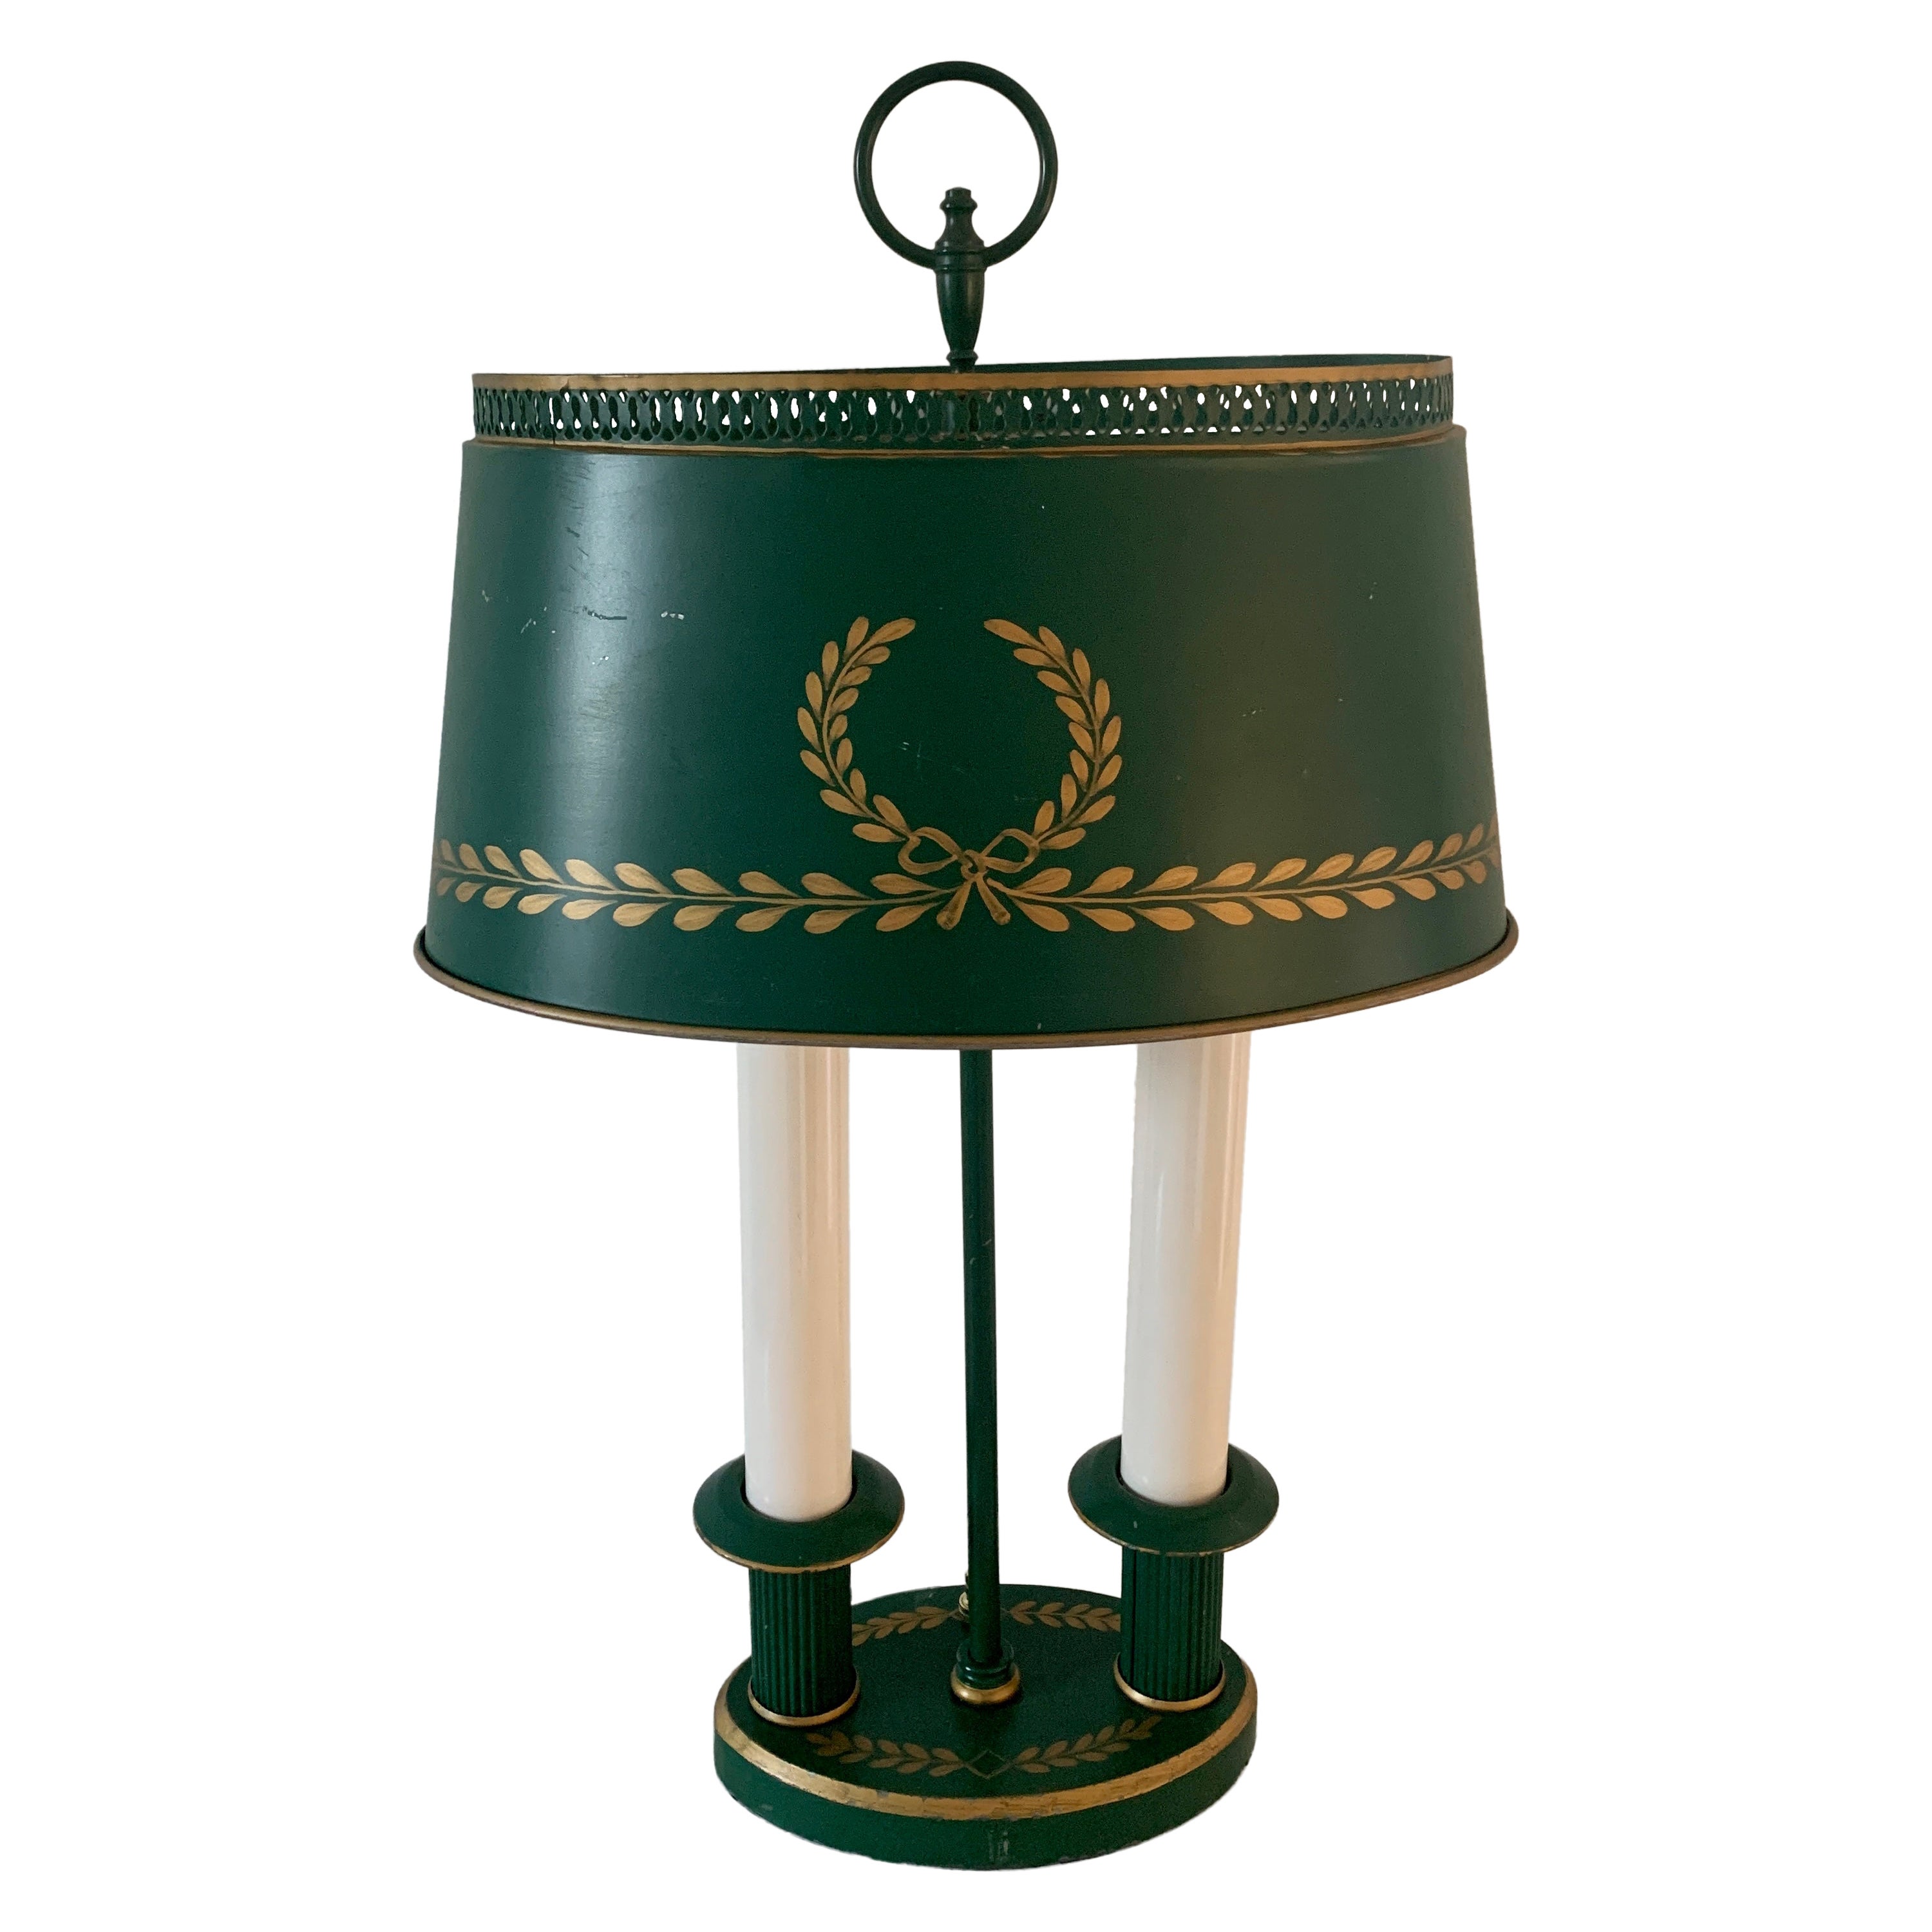 Mid-20th Century French Regency Green and Gold Tole Bouillotte Lamp